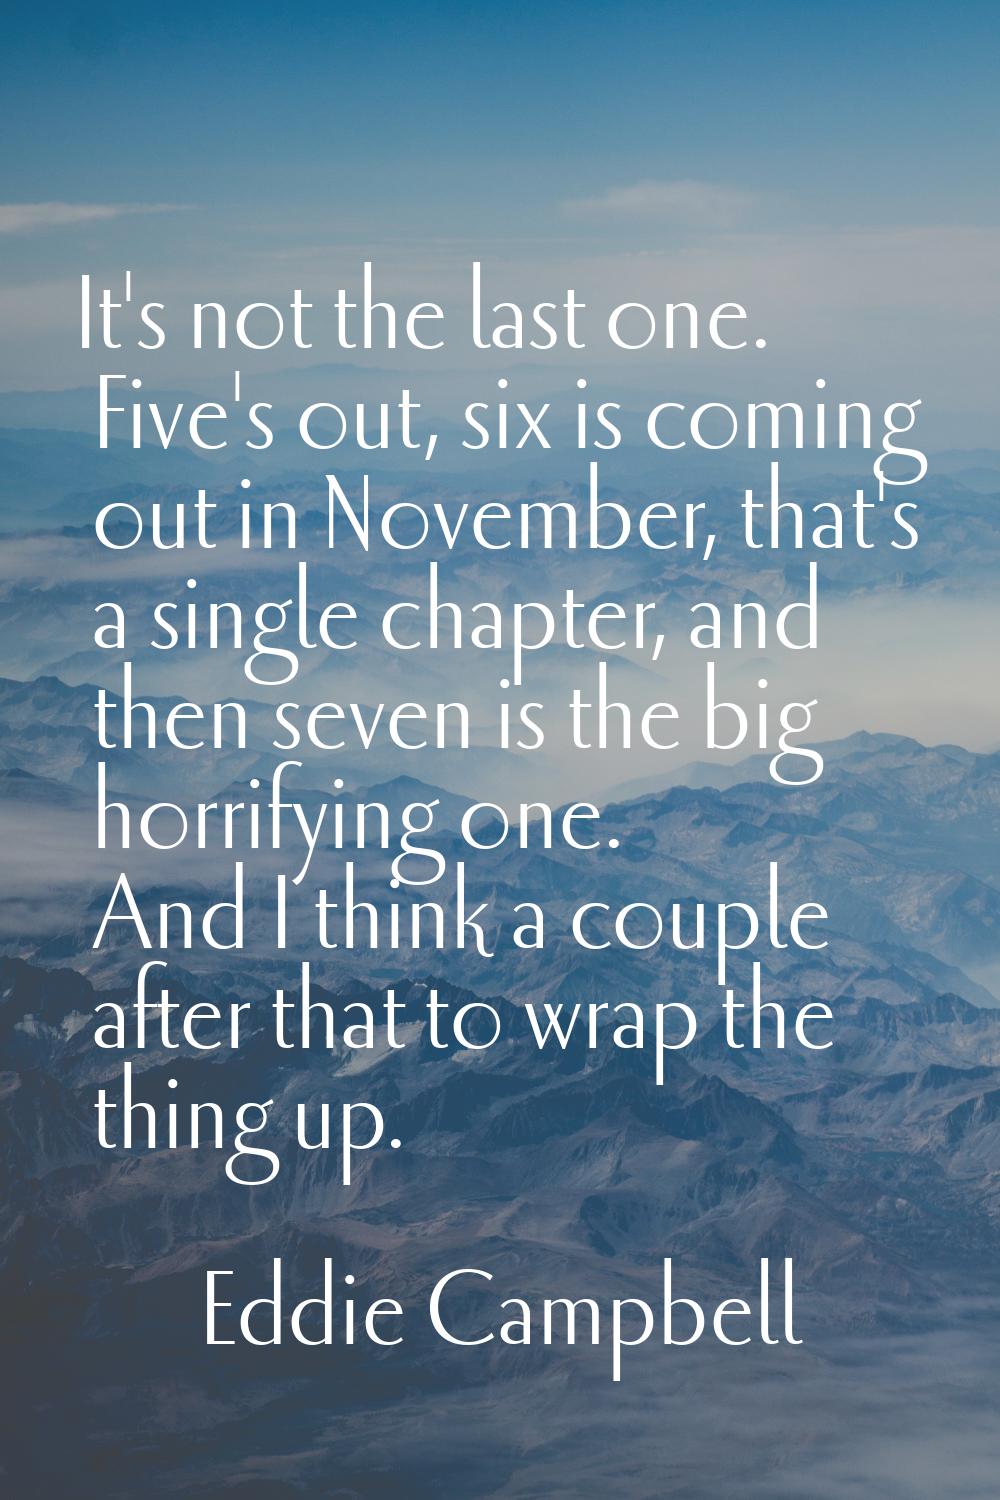 It's not the last one. Five's out, six is coming out in November, that's a single chapter, and then